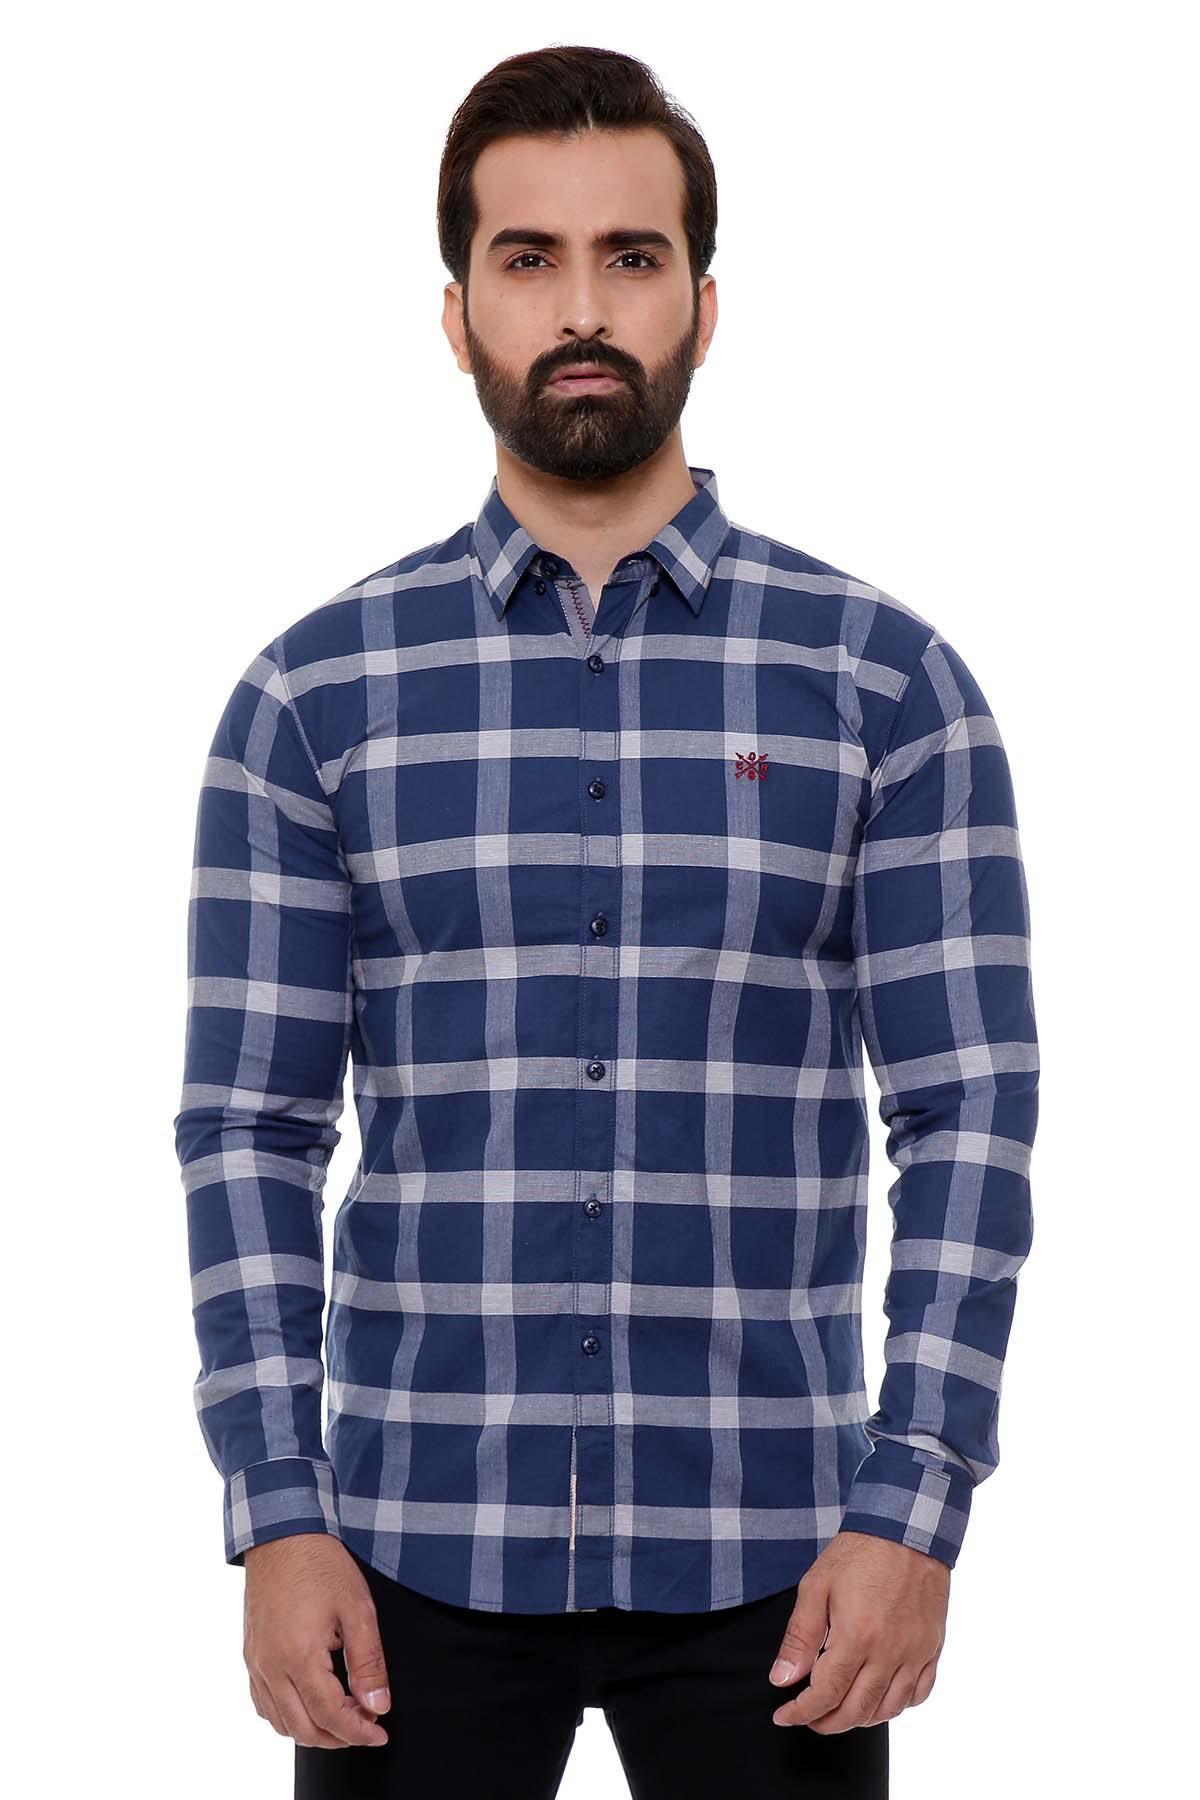 CASUAL SHIRT FULL SLEEVE NAVY SLIM FIT at Charcoal Clothing